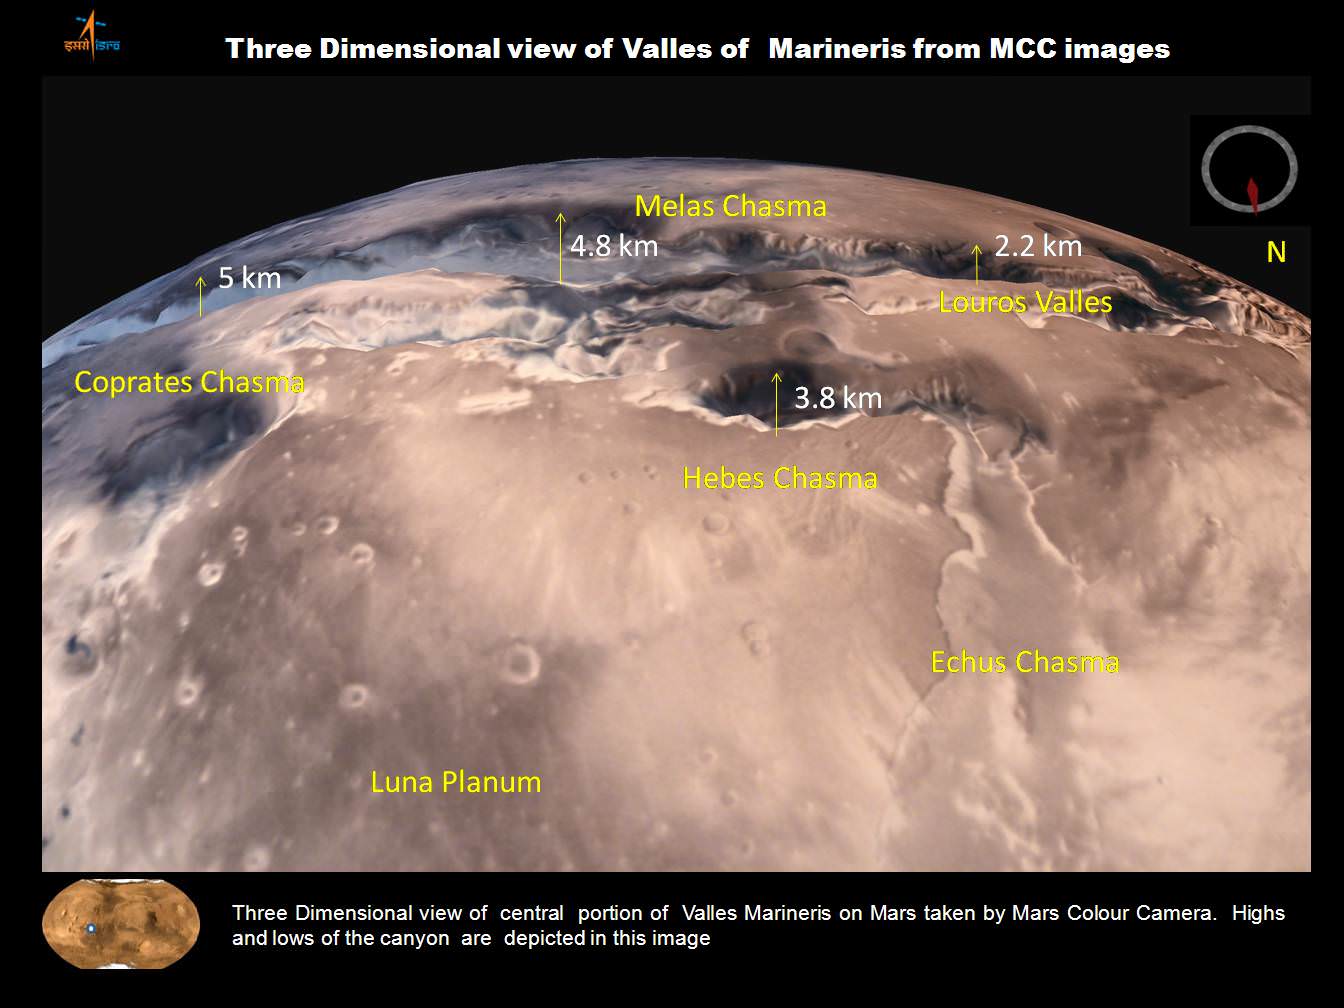 Three dimensional view of Valles Marineris center portion from India’s MOM Mars Mission.   Credit: ISRO